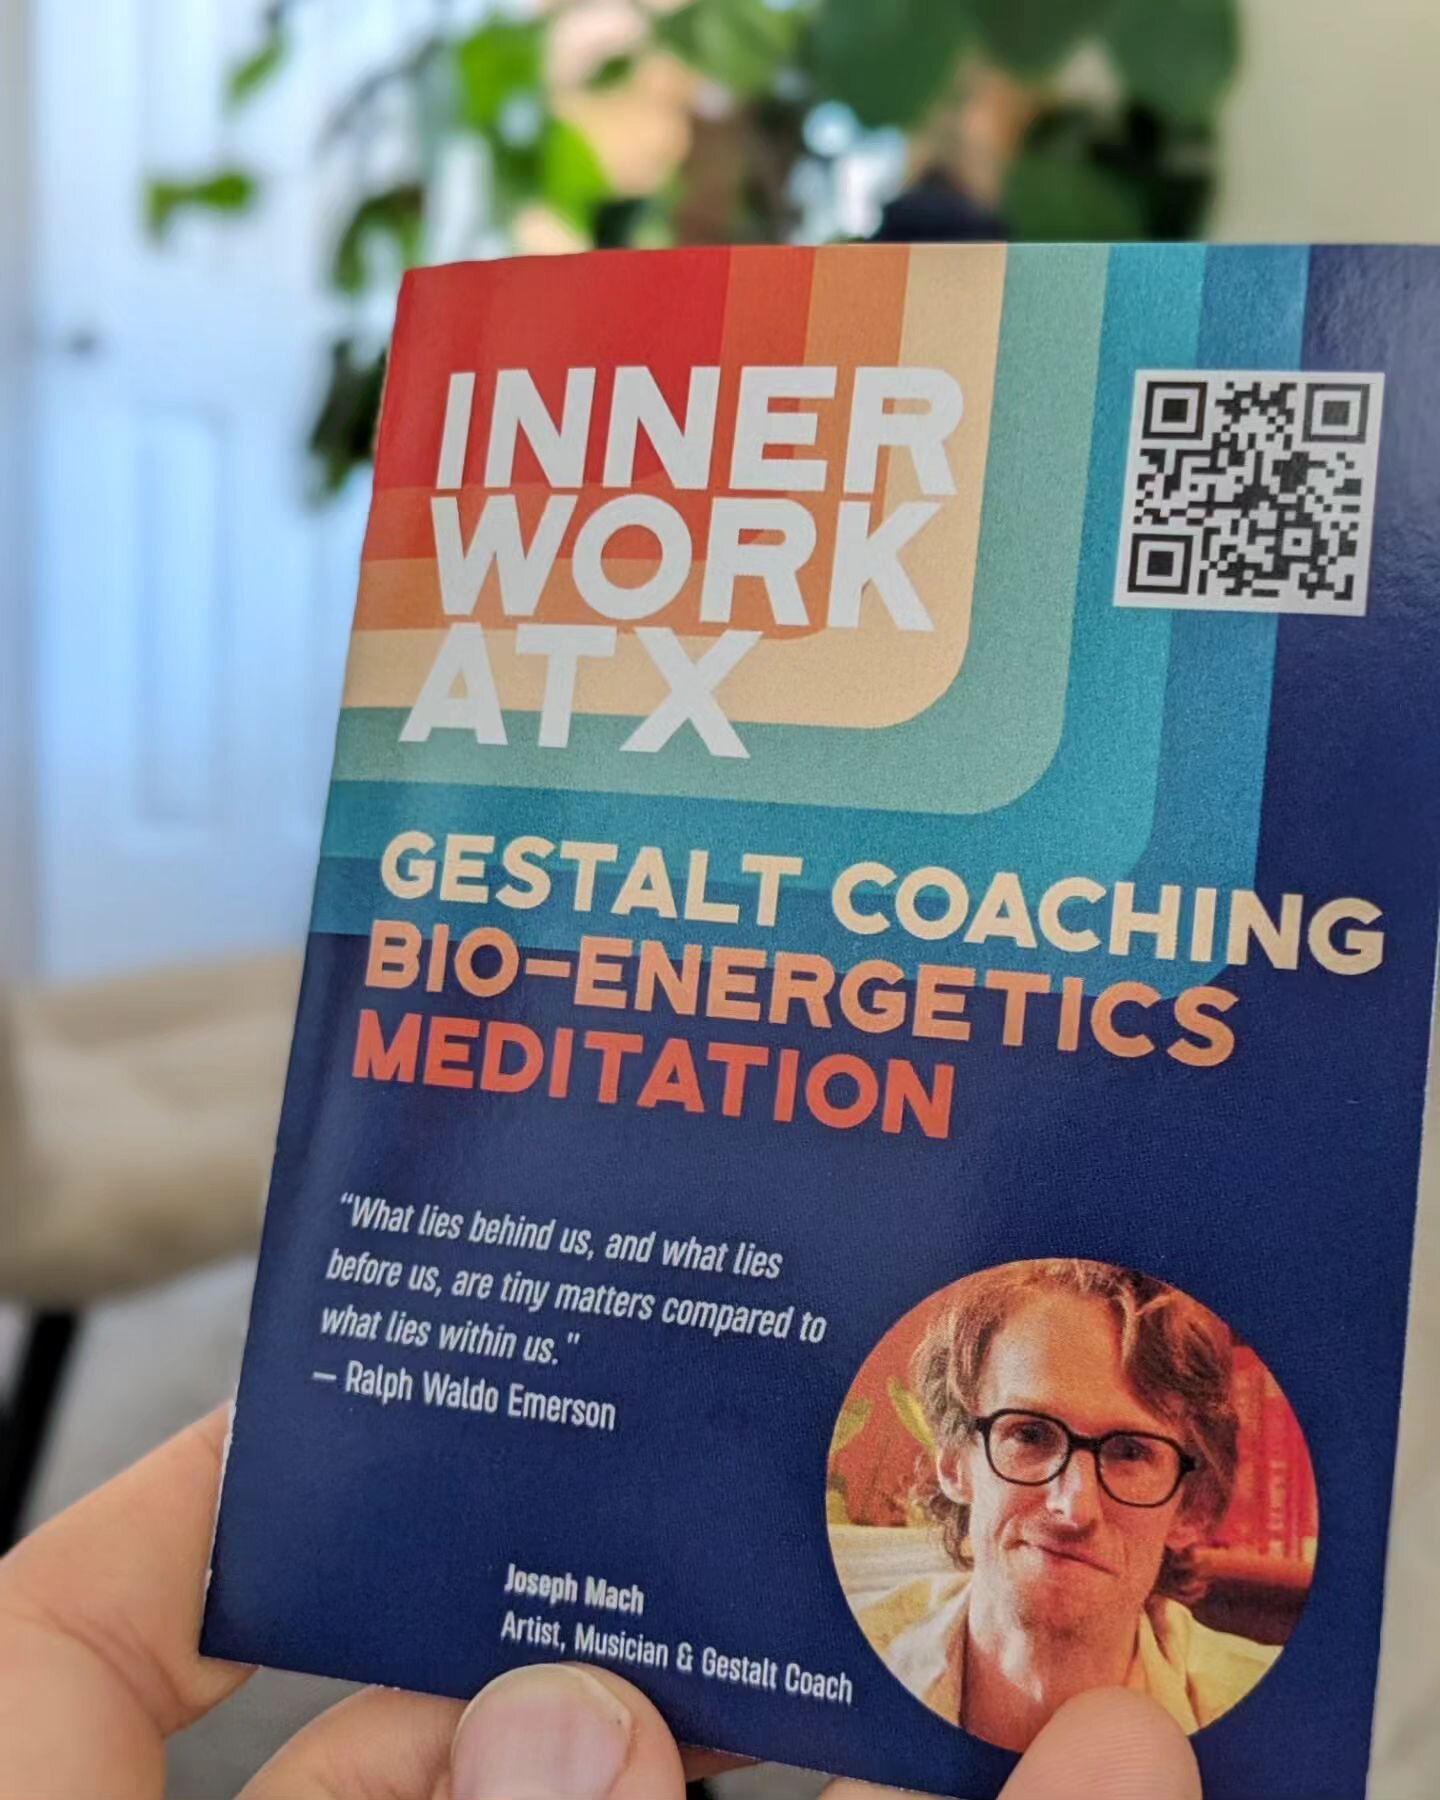 Gearing up for a new chapter of Inner Work ATX - got these snazzy brochures printed for several upcoming workshops and retreats.

Feeling called to do some inner work? 

Let's connect ✌🏼

#innerwork #gestaltwork #bioenergetics #wilhelmreich #worksho